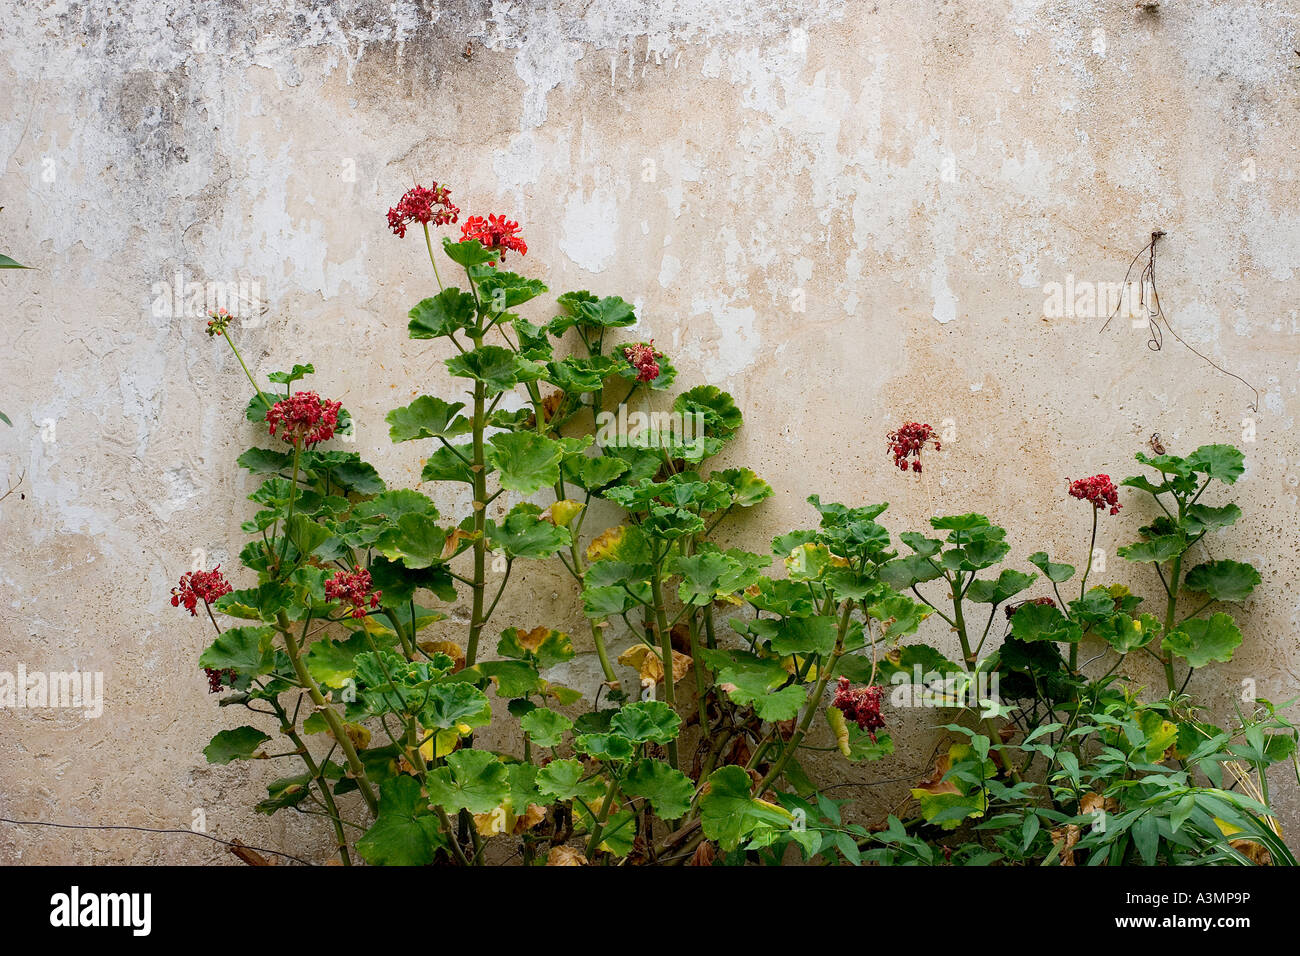 wall with geraniums growing against it Stock Photo